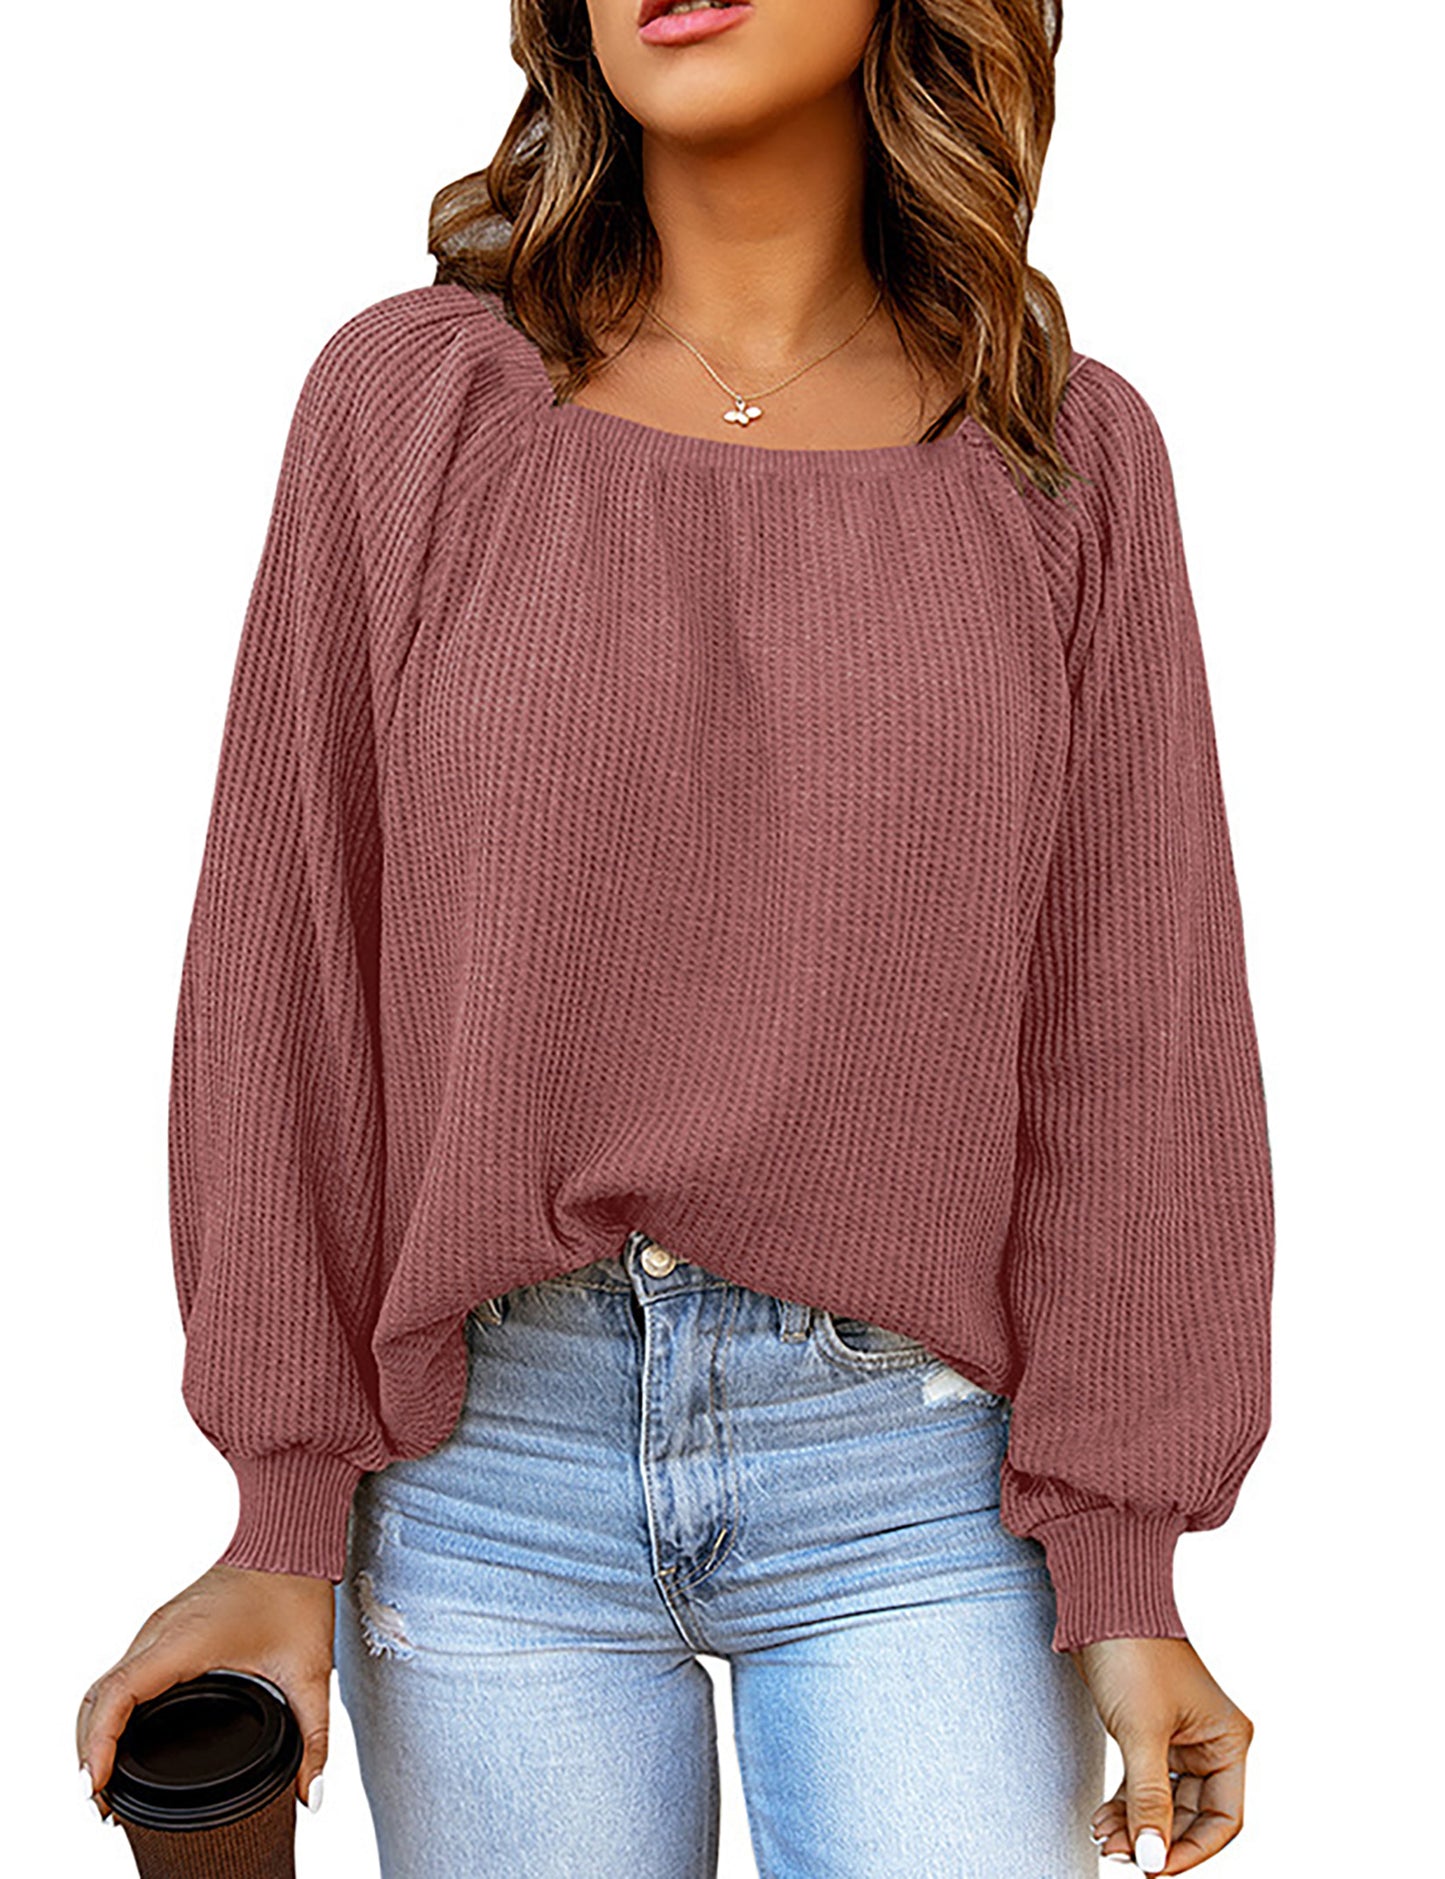 YESFASHION Square Neck Loose Casual Knitted Sweater Tops